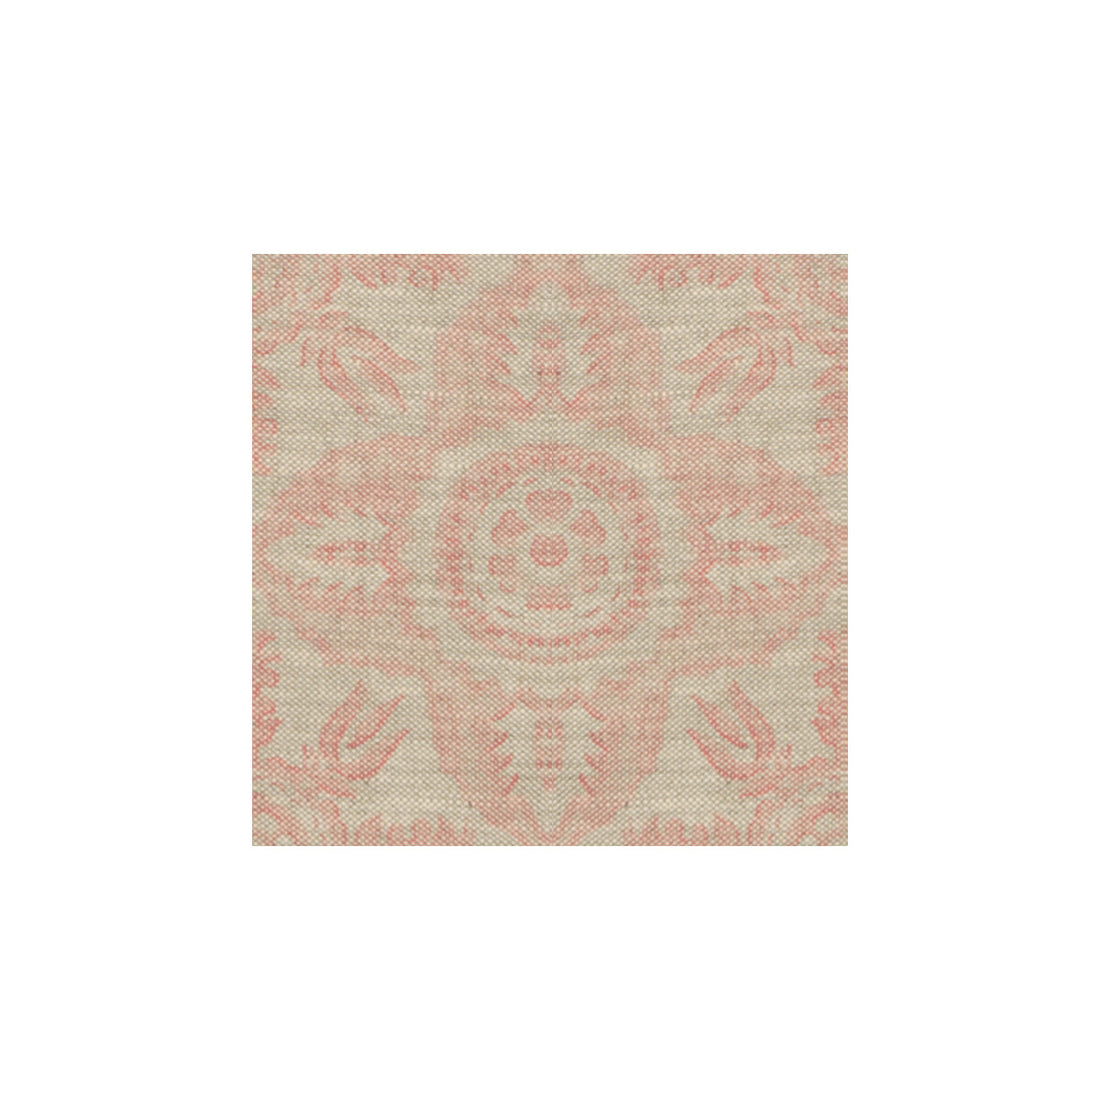 Rossmore fabric in pink color - pattern BFC-3517.17.0 - by Lee Jofa in the Blithfield collection